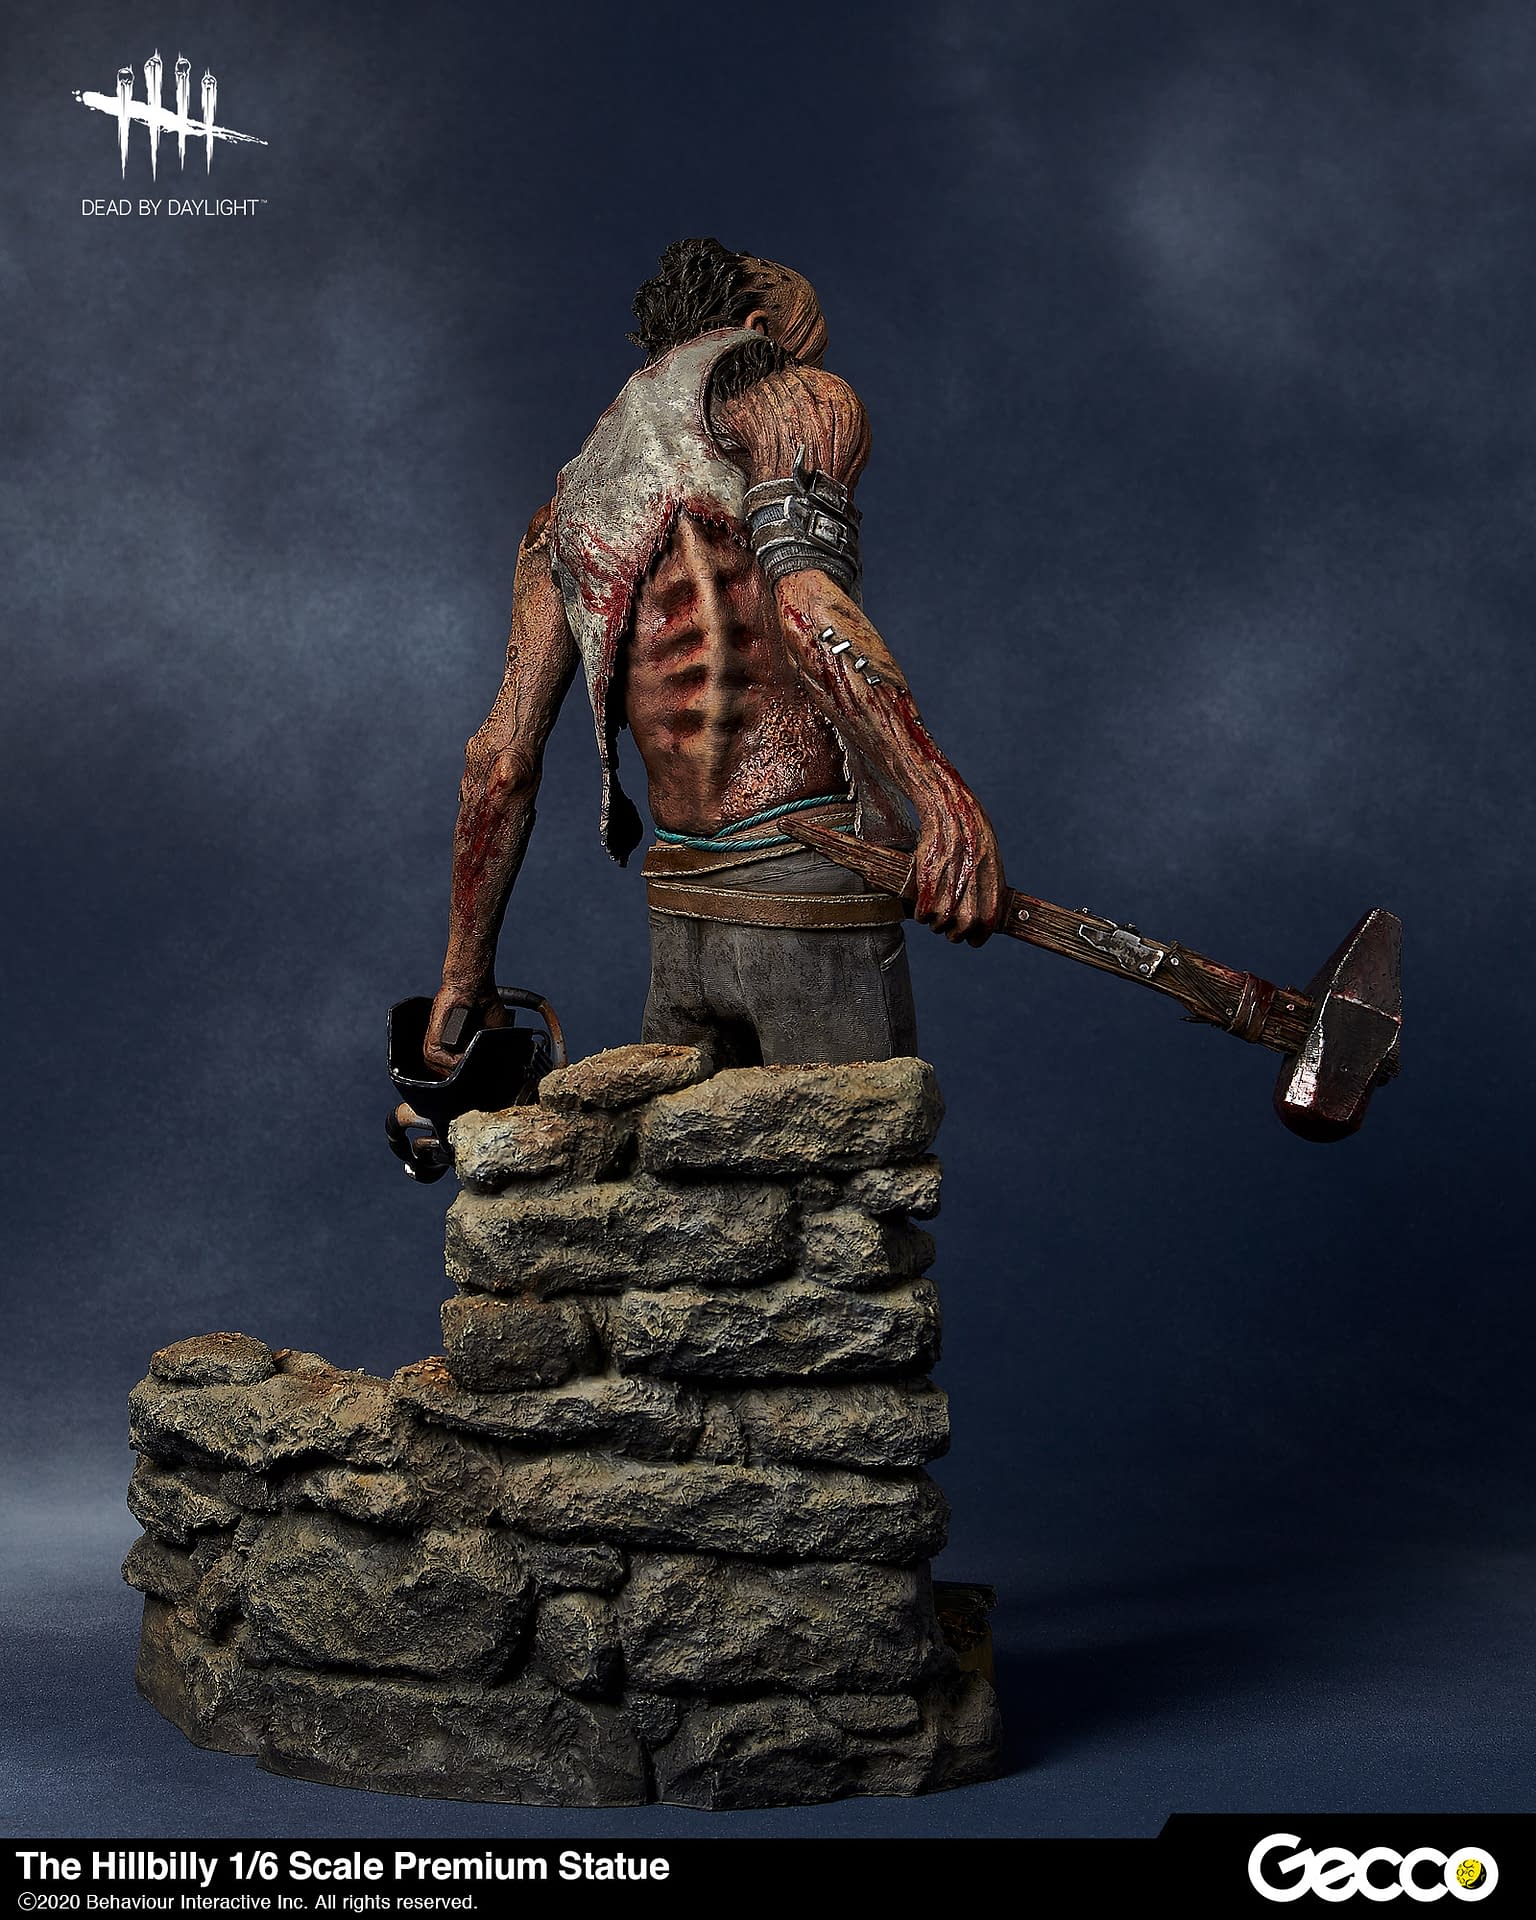 Gecco-Dead-by-Daylight-Hillbilly-Statue-005